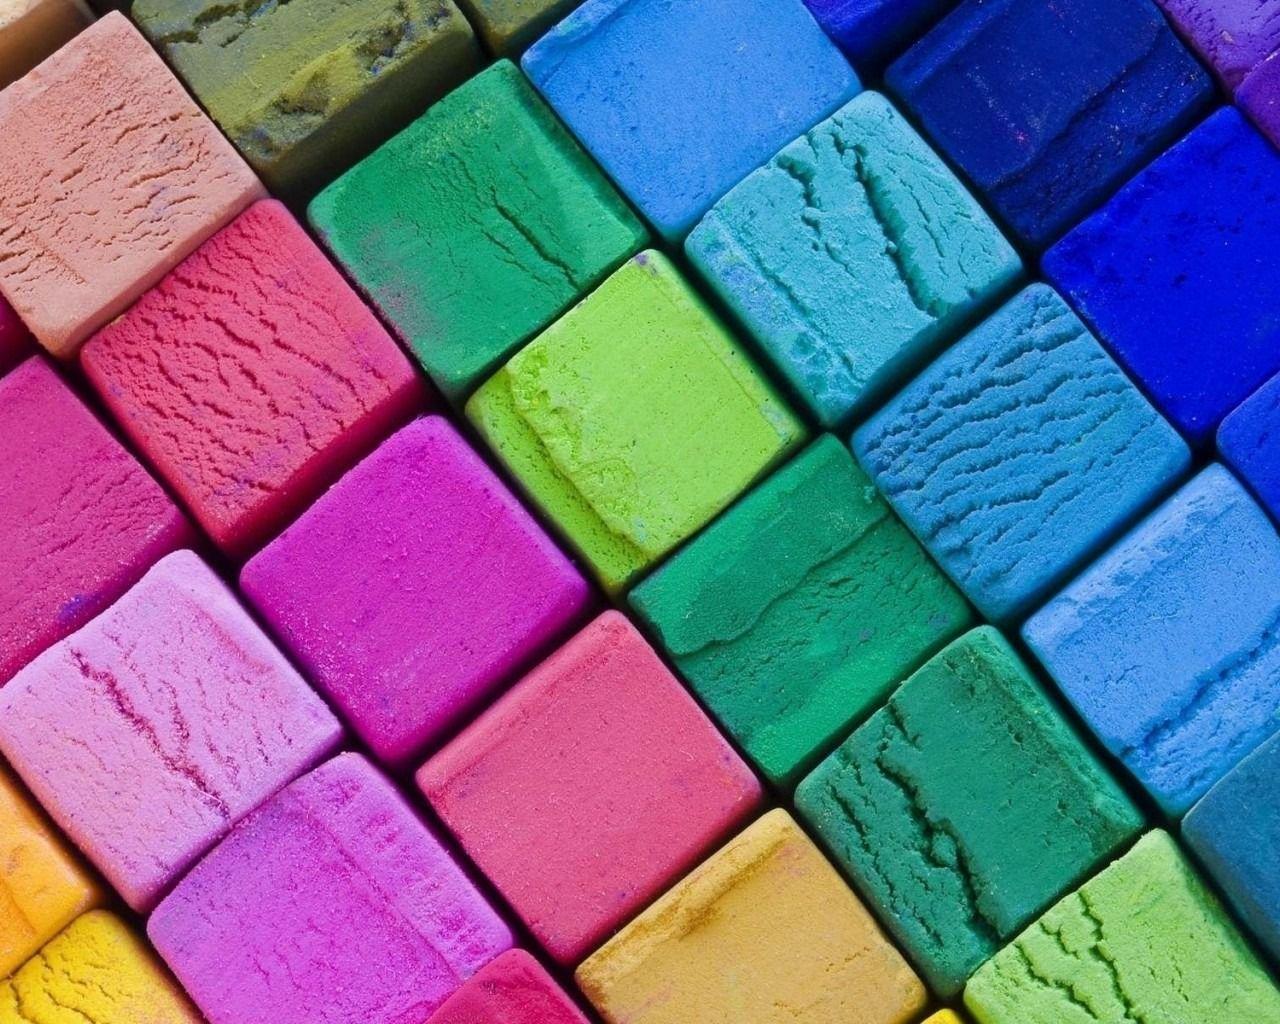 Colorful Cubes HD Wallpaper